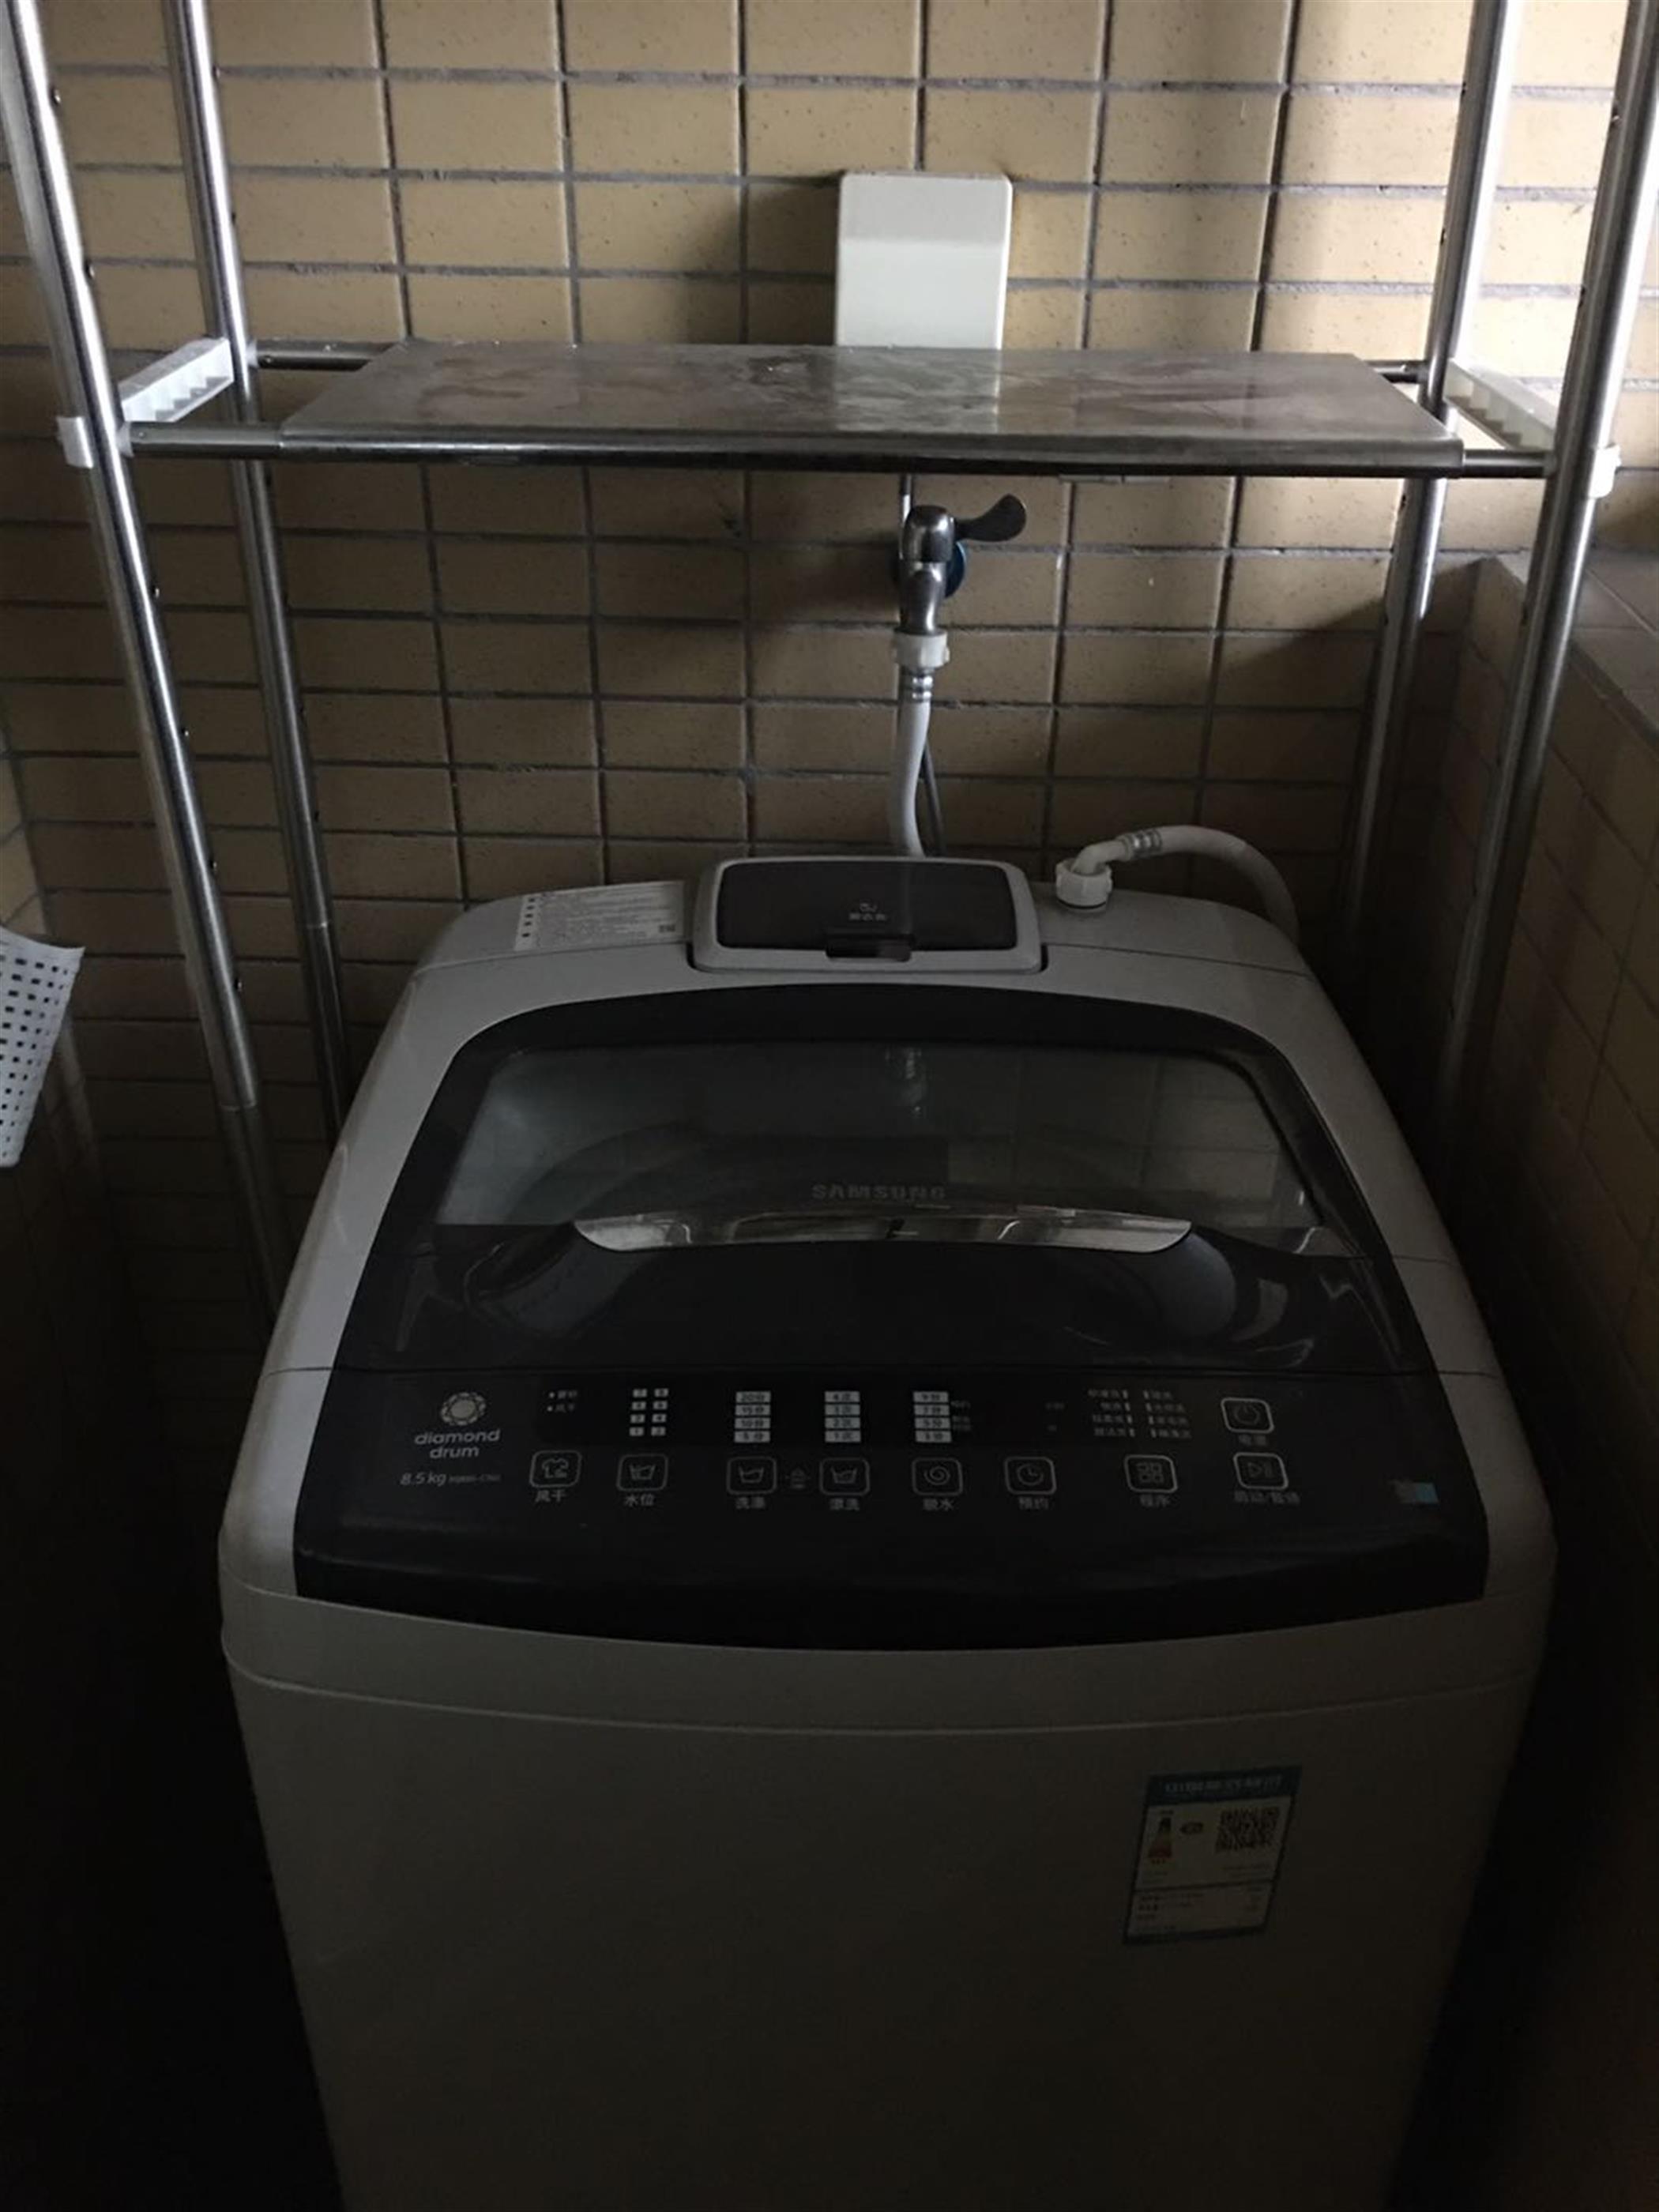 washing machine Affordable 2BR Suzhou Creek Apartment Nr LN 1/12/13 for Rent in Shanghai